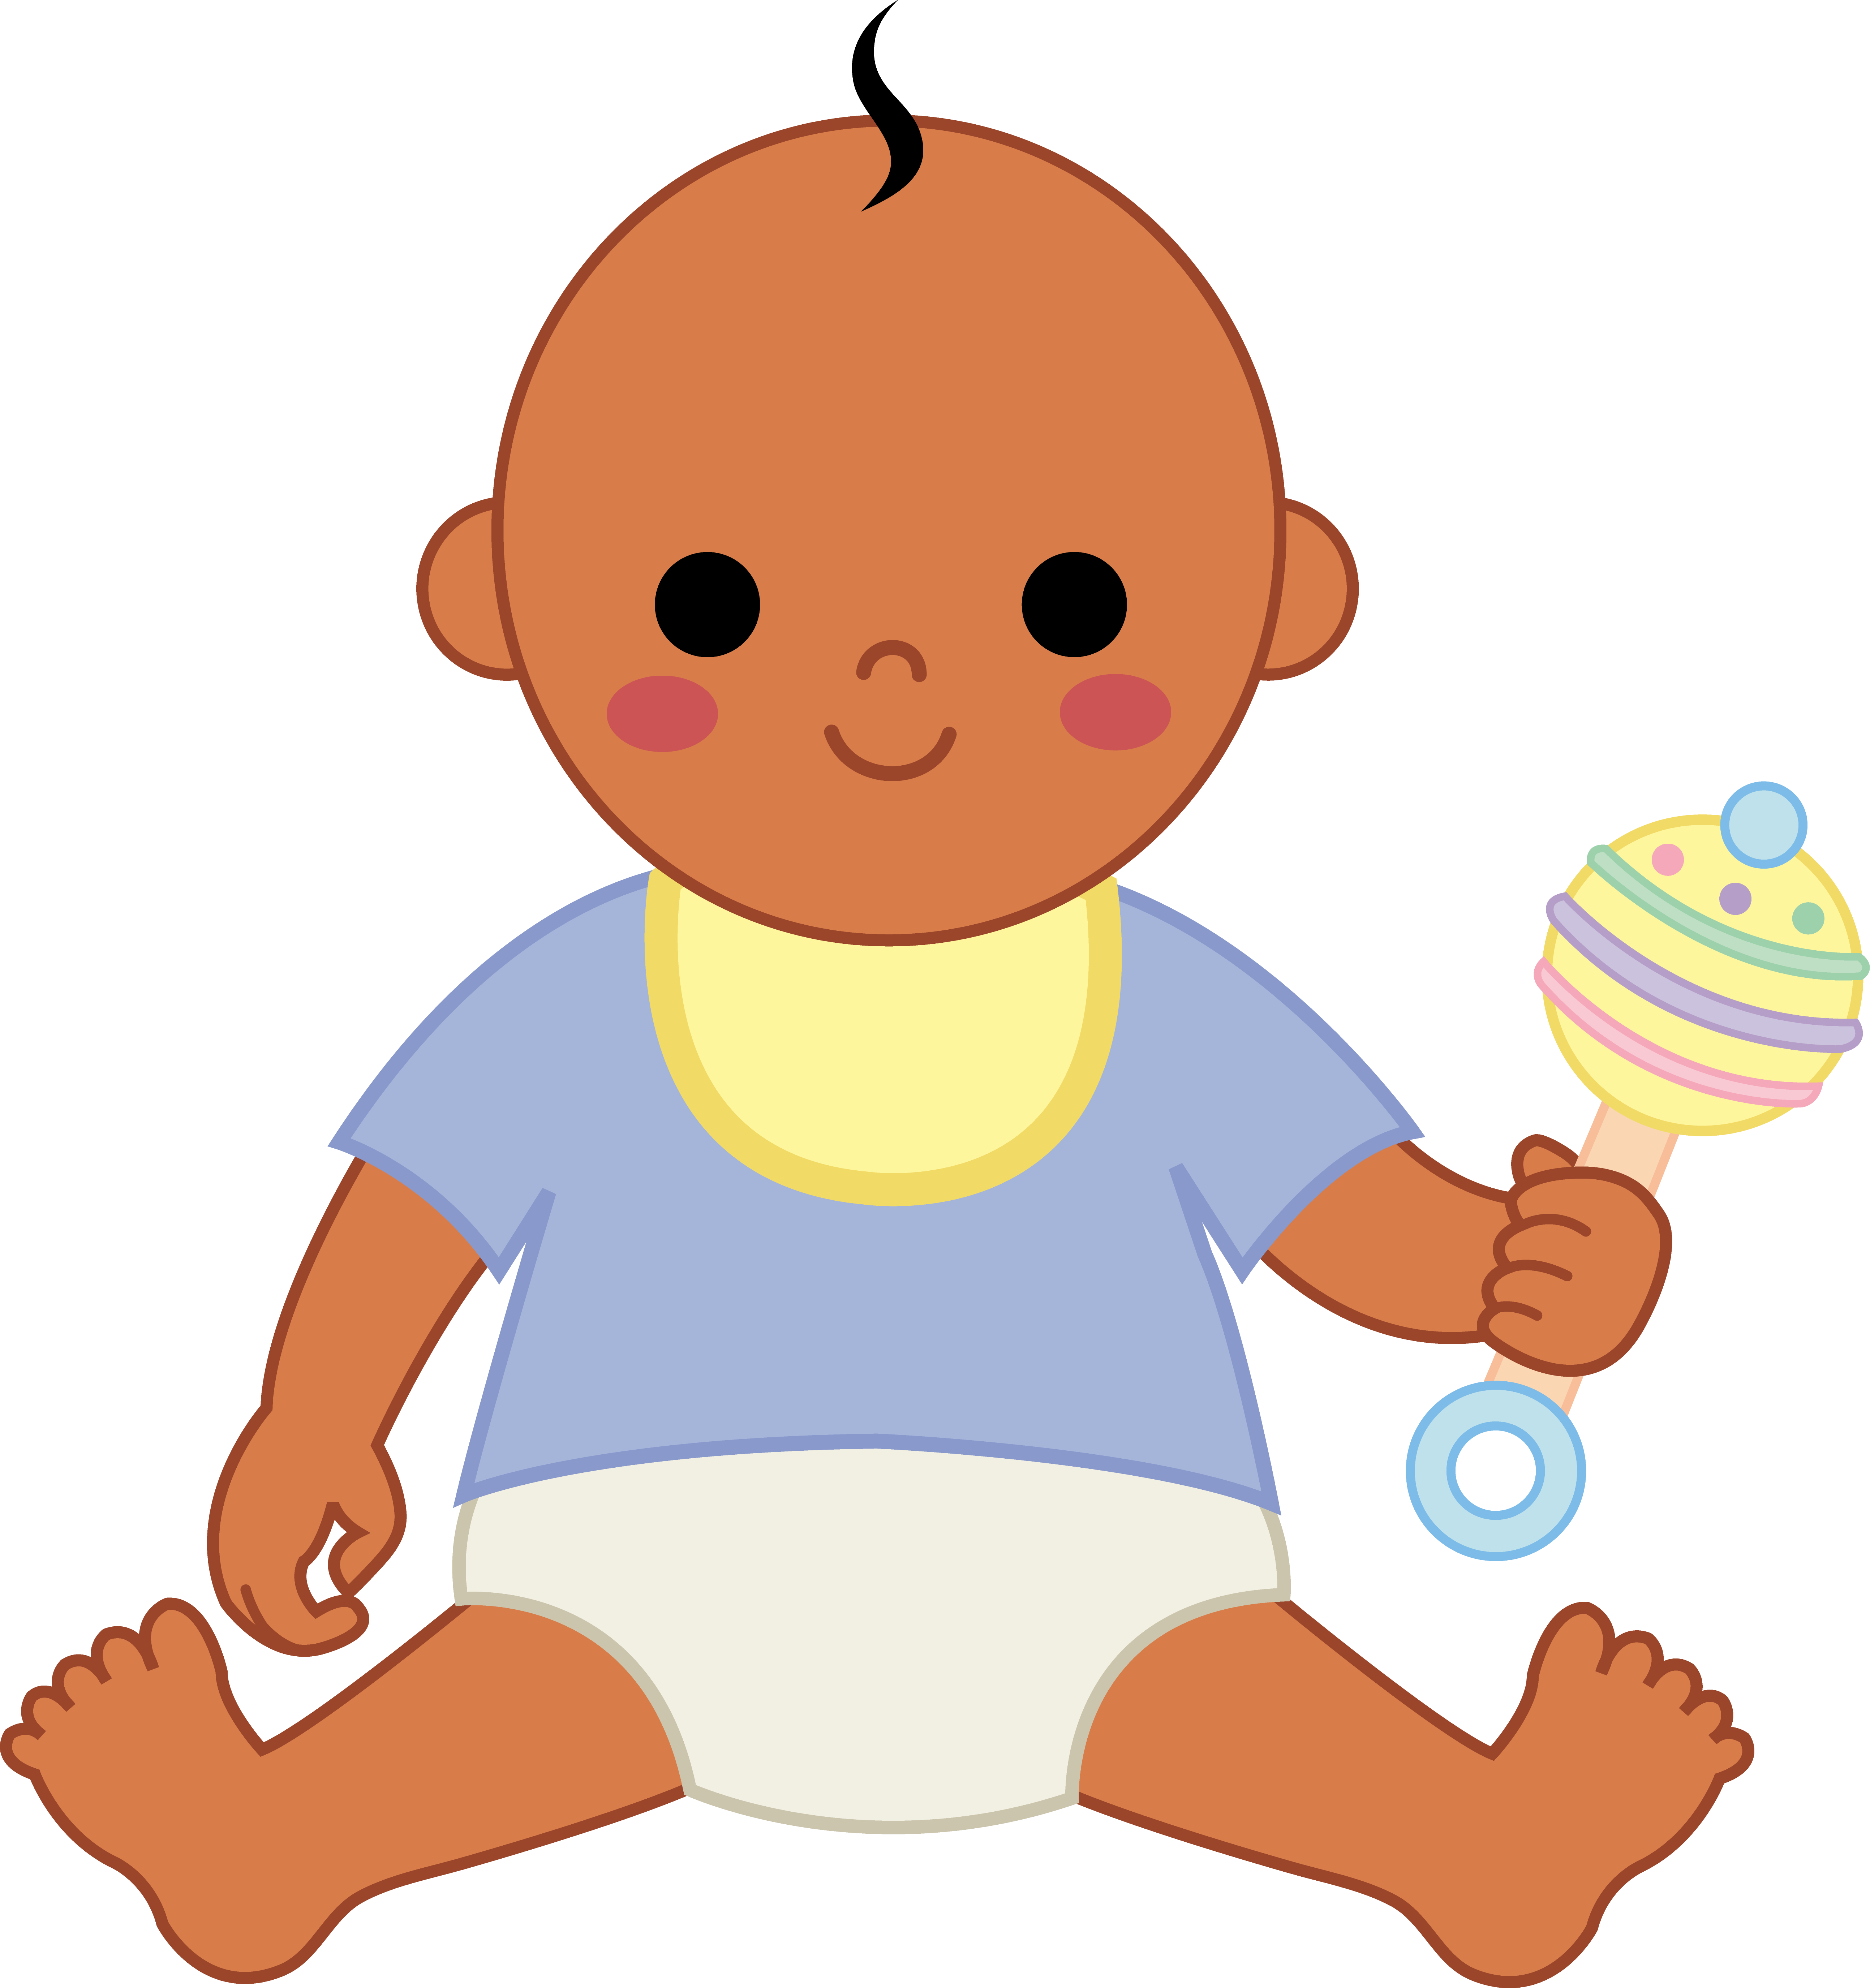 African American Baby Clipart - ClipArt Best